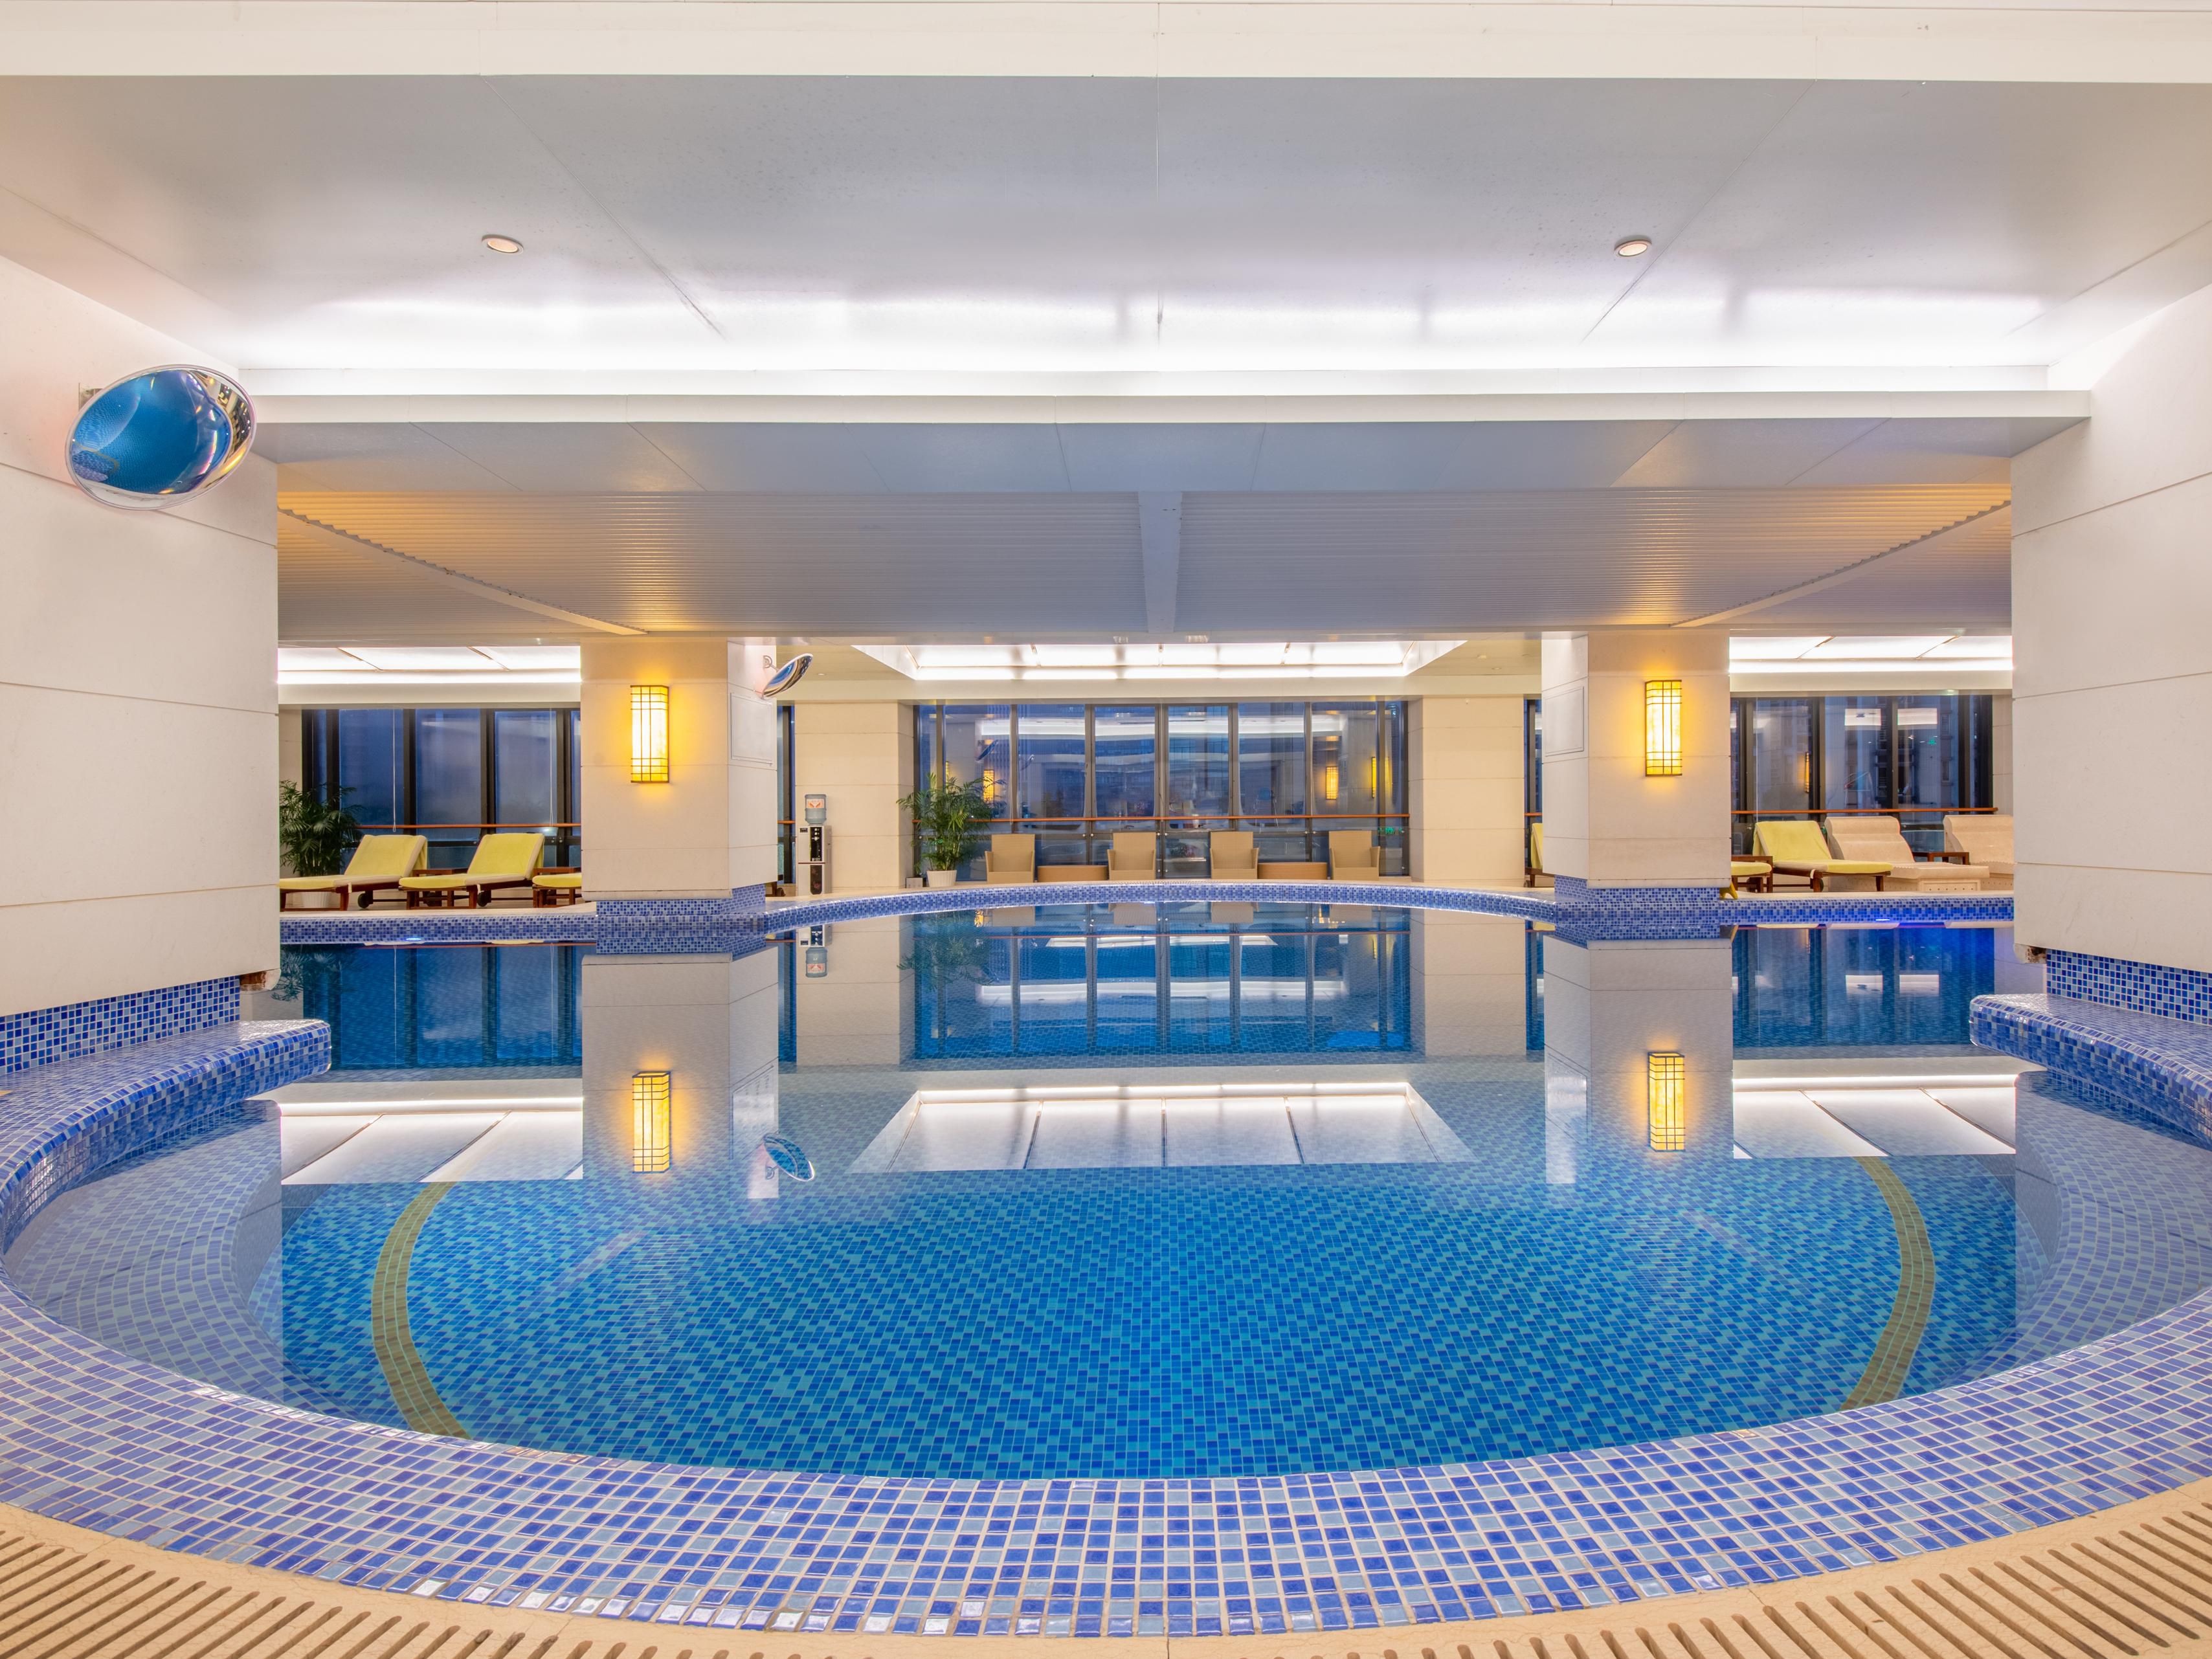 Holiday Inn Hangzhou Qianjiang New City has an indoor fitness center and an indoor heated swimming pool.